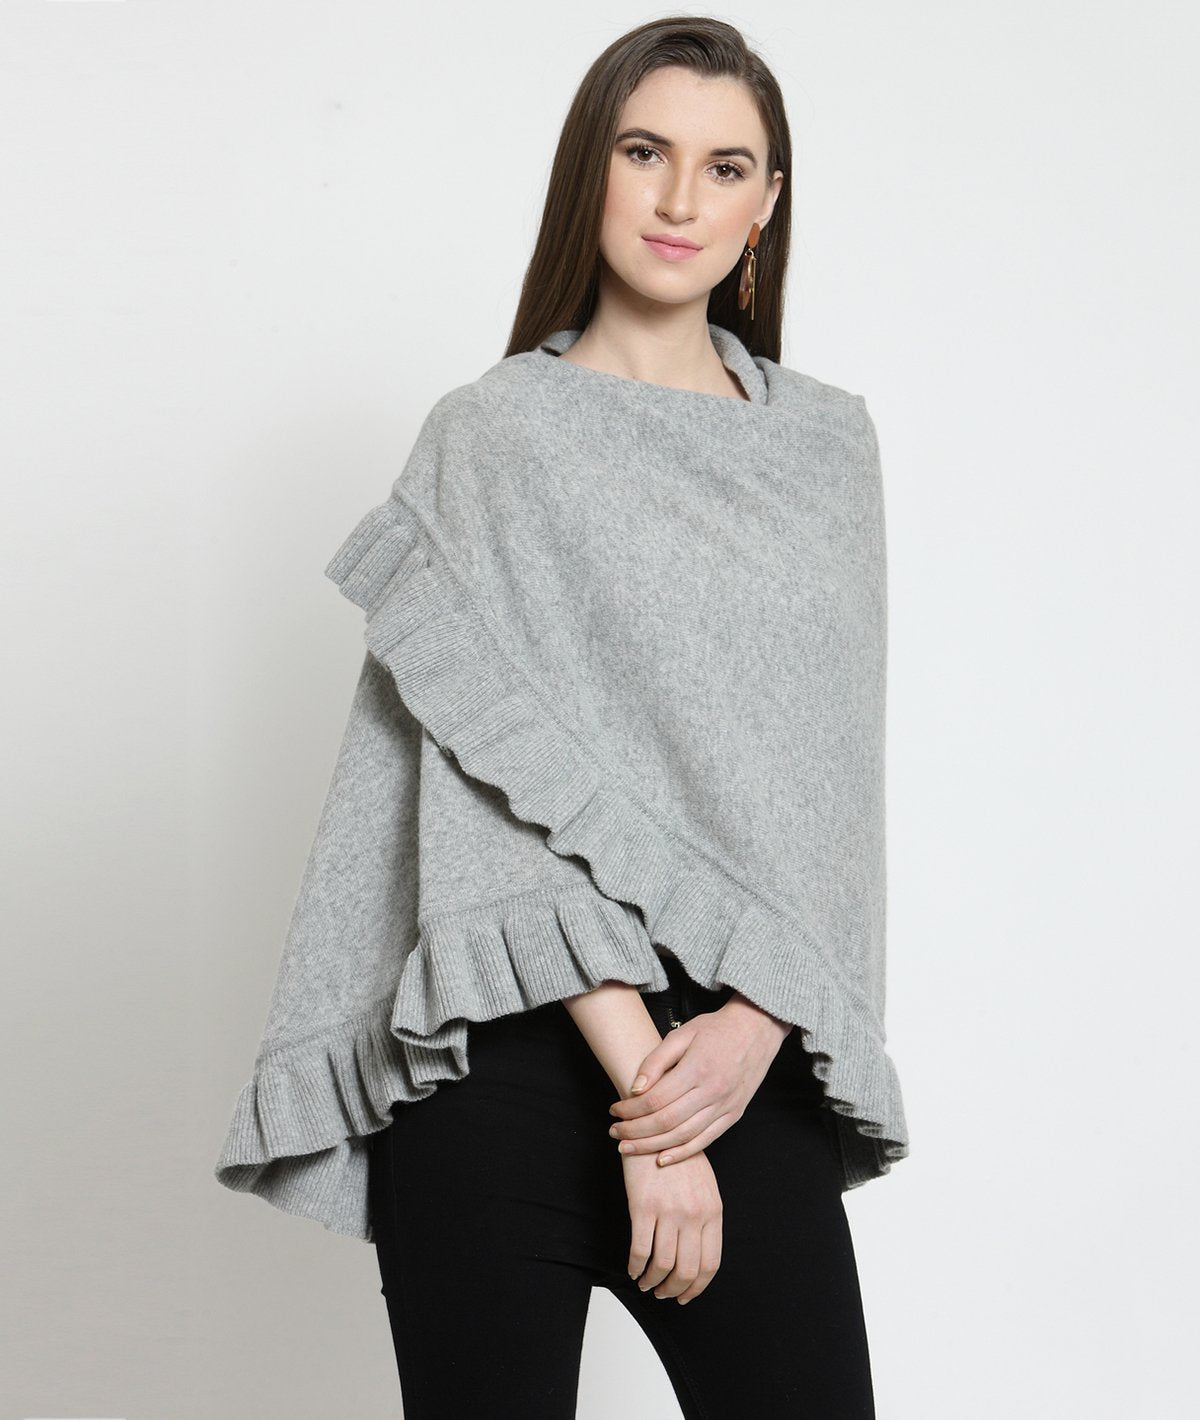 Daisy - Light Grey Lambswool & Nylon Knitted Fashion Poncho / Top / Cape